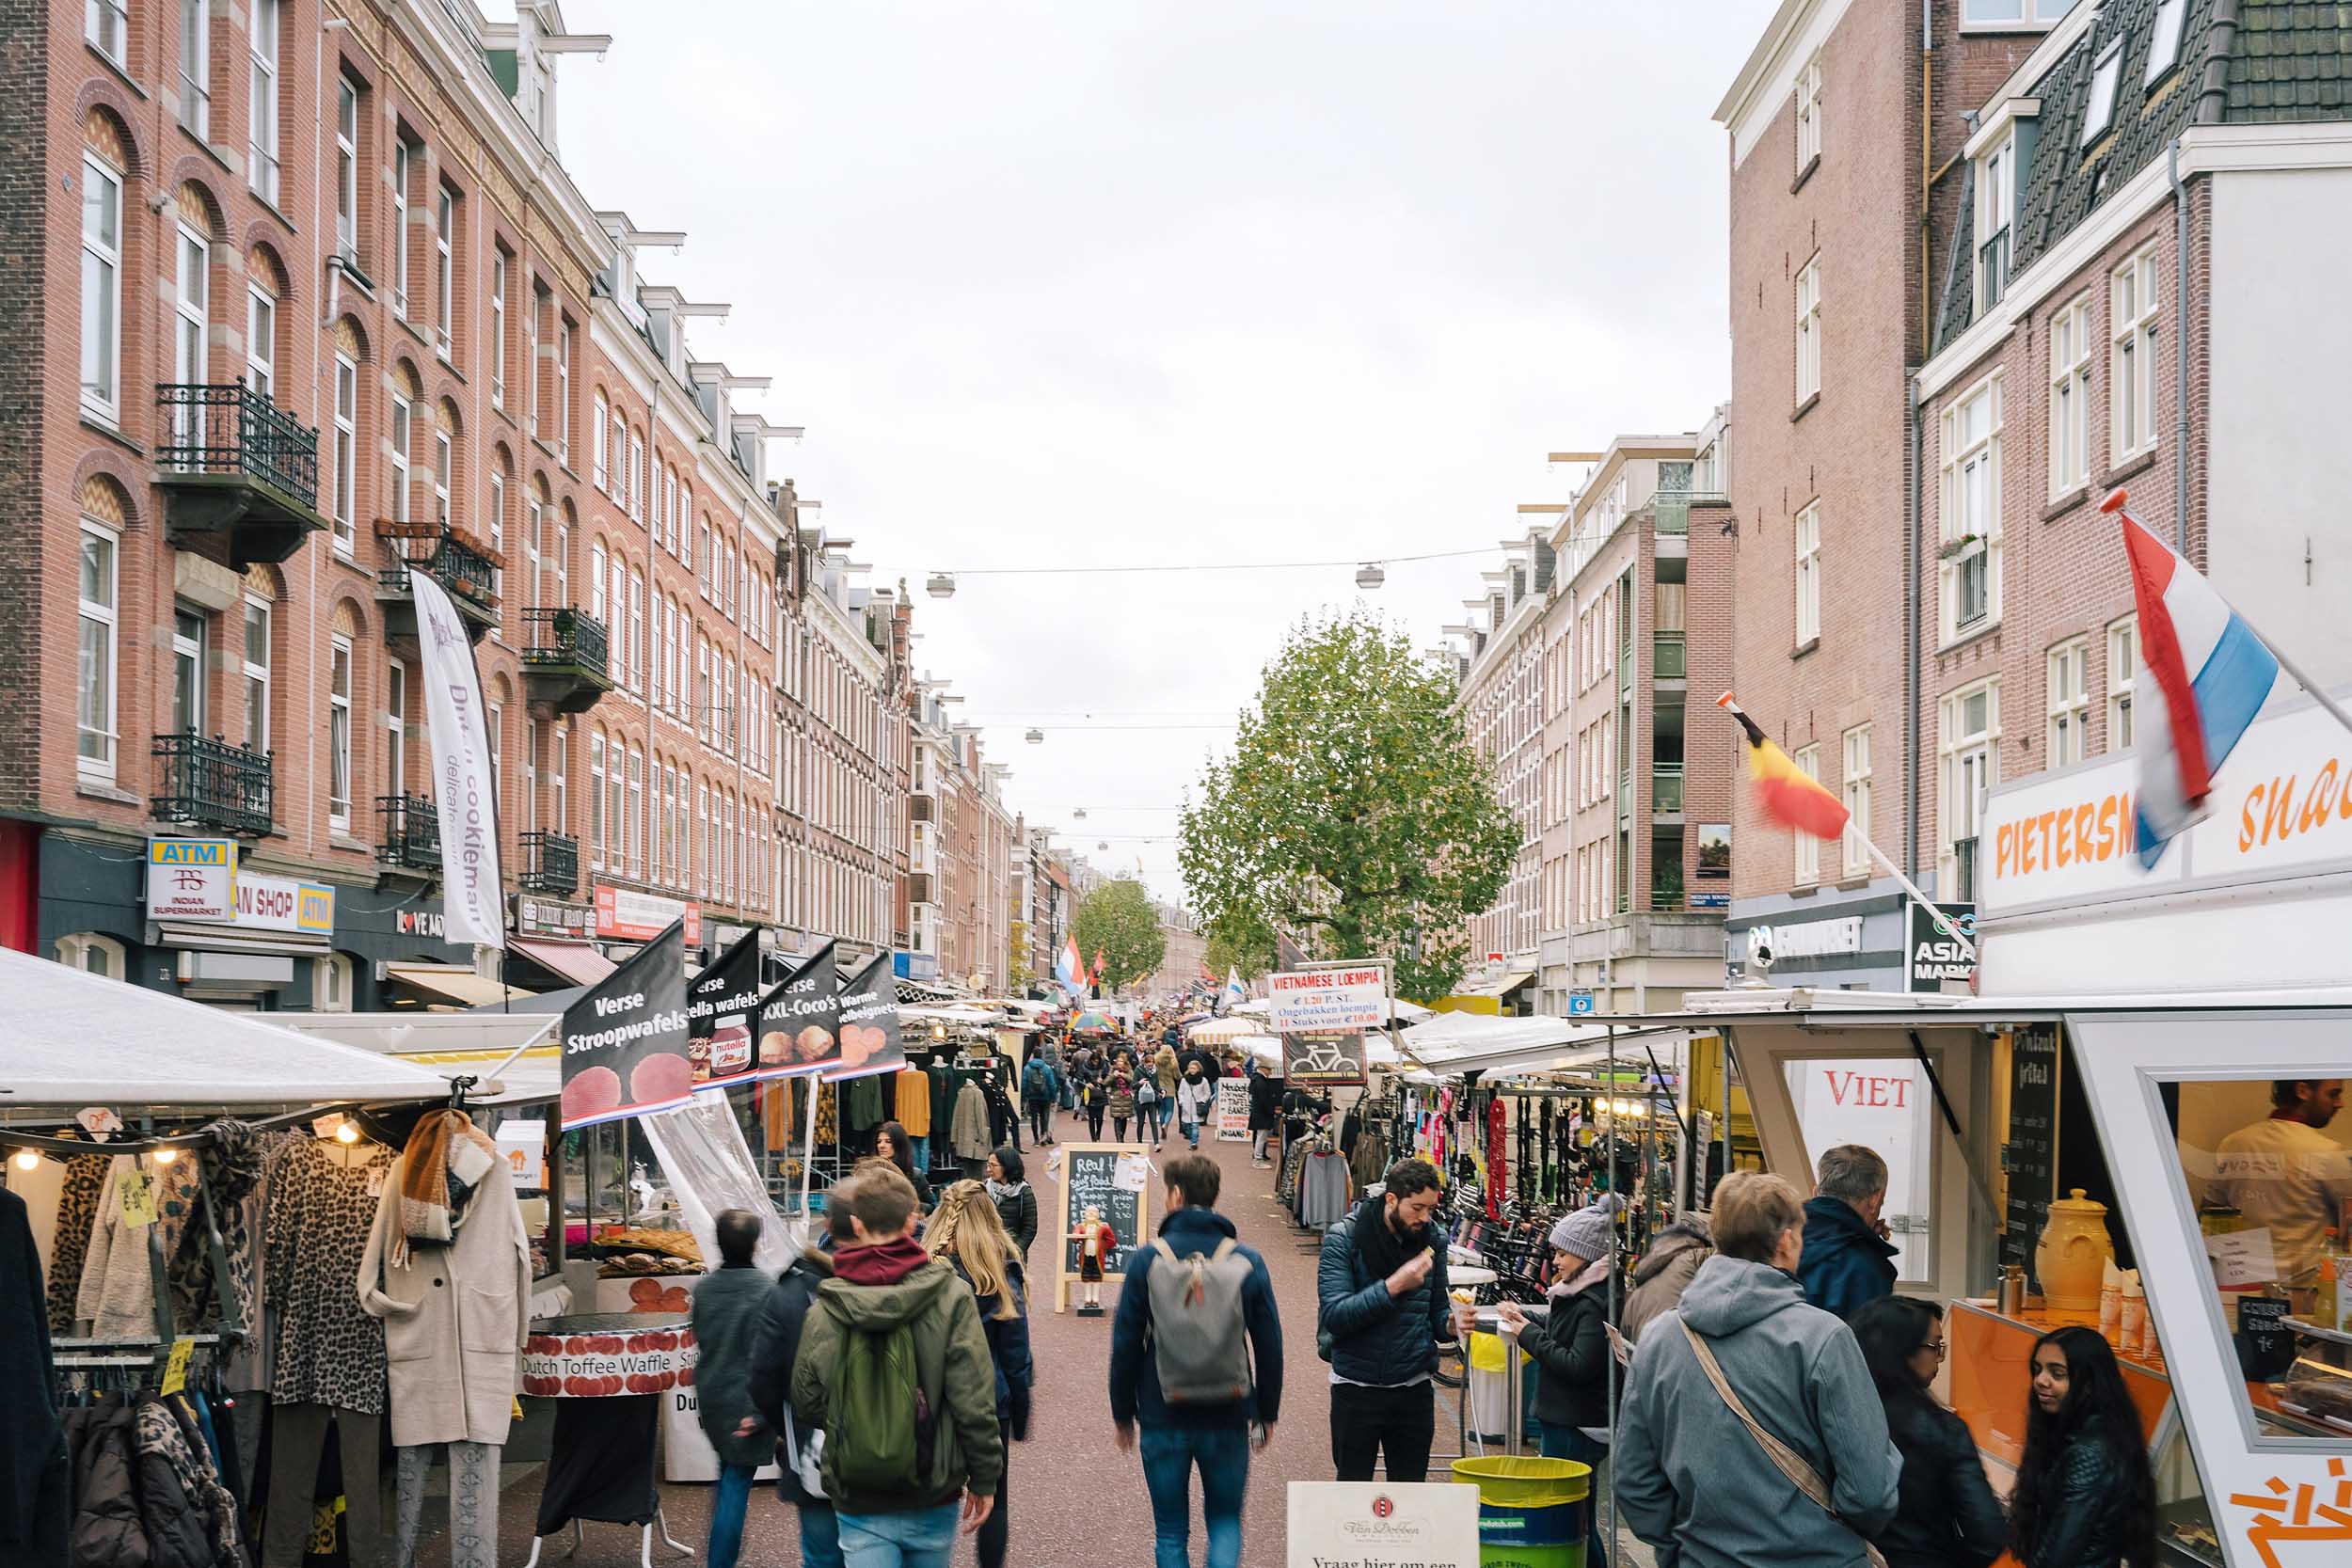 Looking for unique things to do in Amsterdam? Visit this market